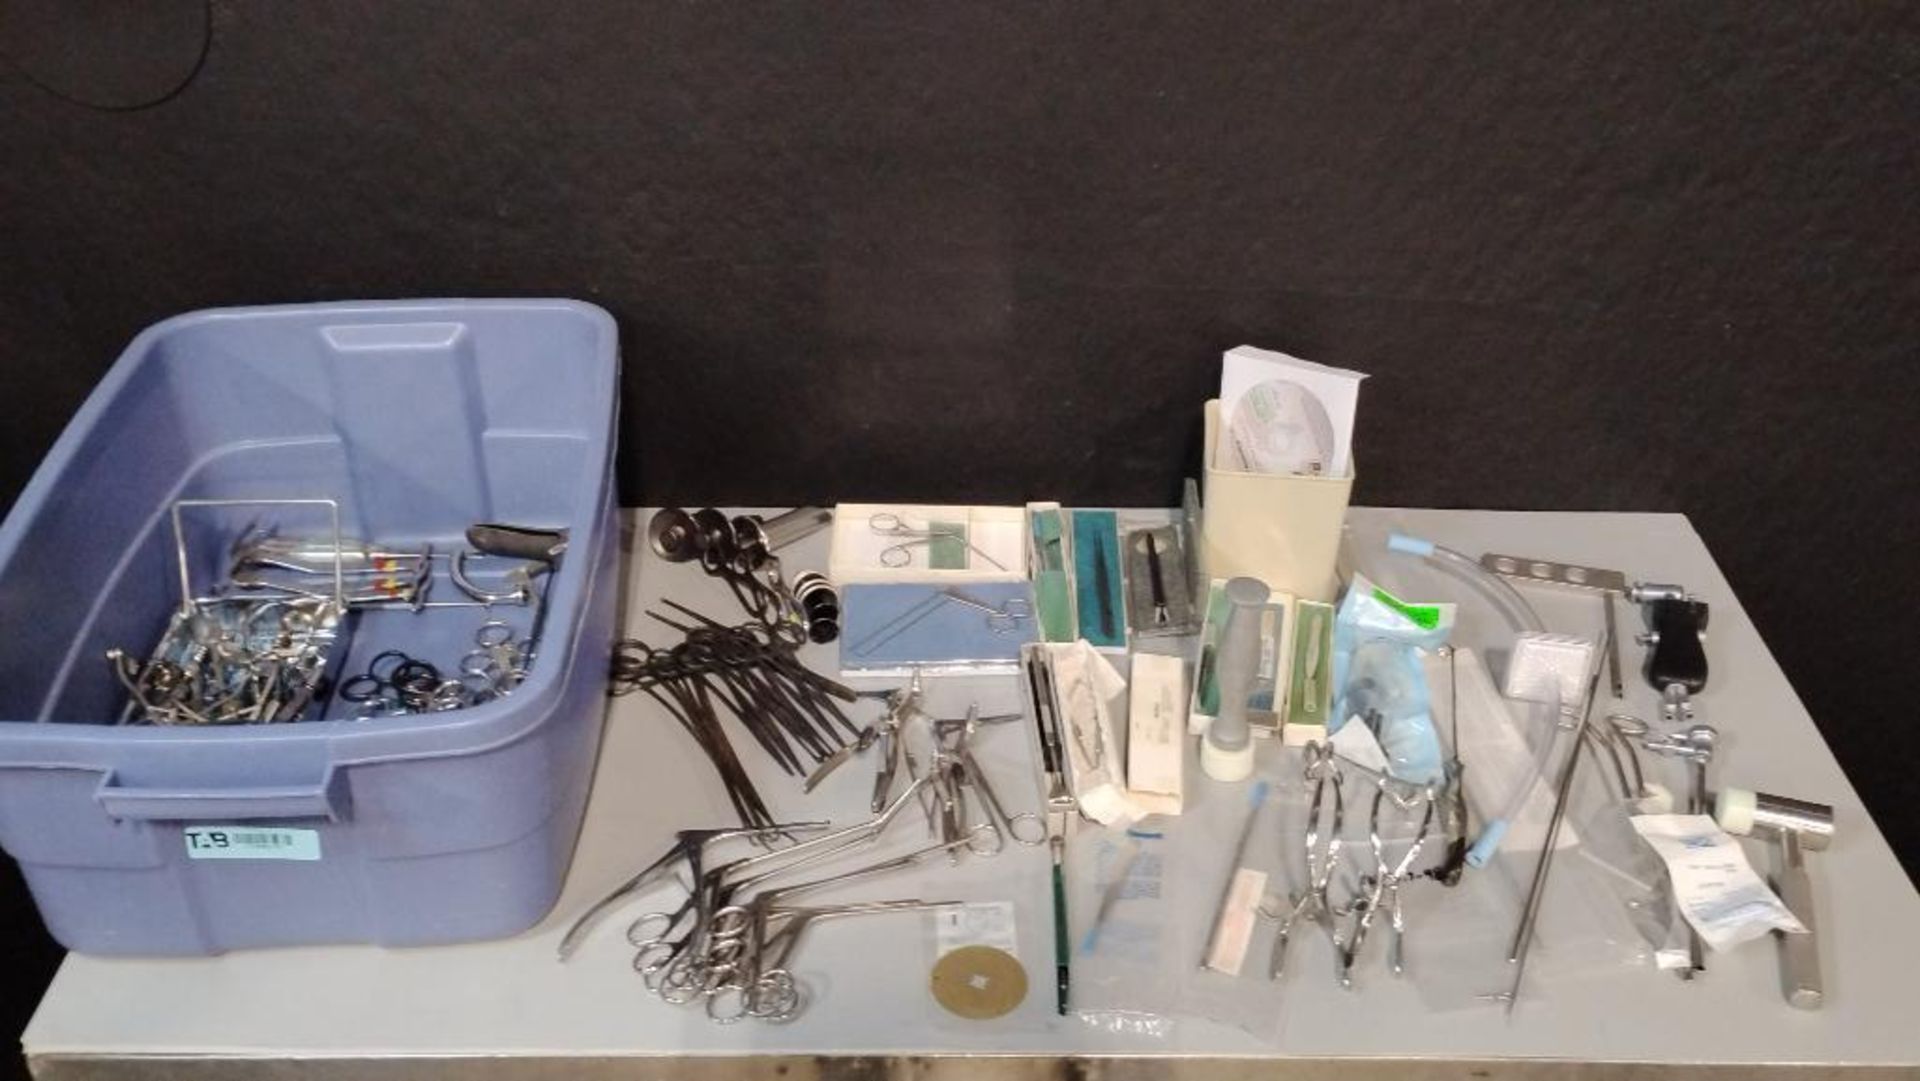 STROZ AND OTHER BRANDS EYE INSTRUMENTS, MISC FORCEPS, OBGYN AND MORE